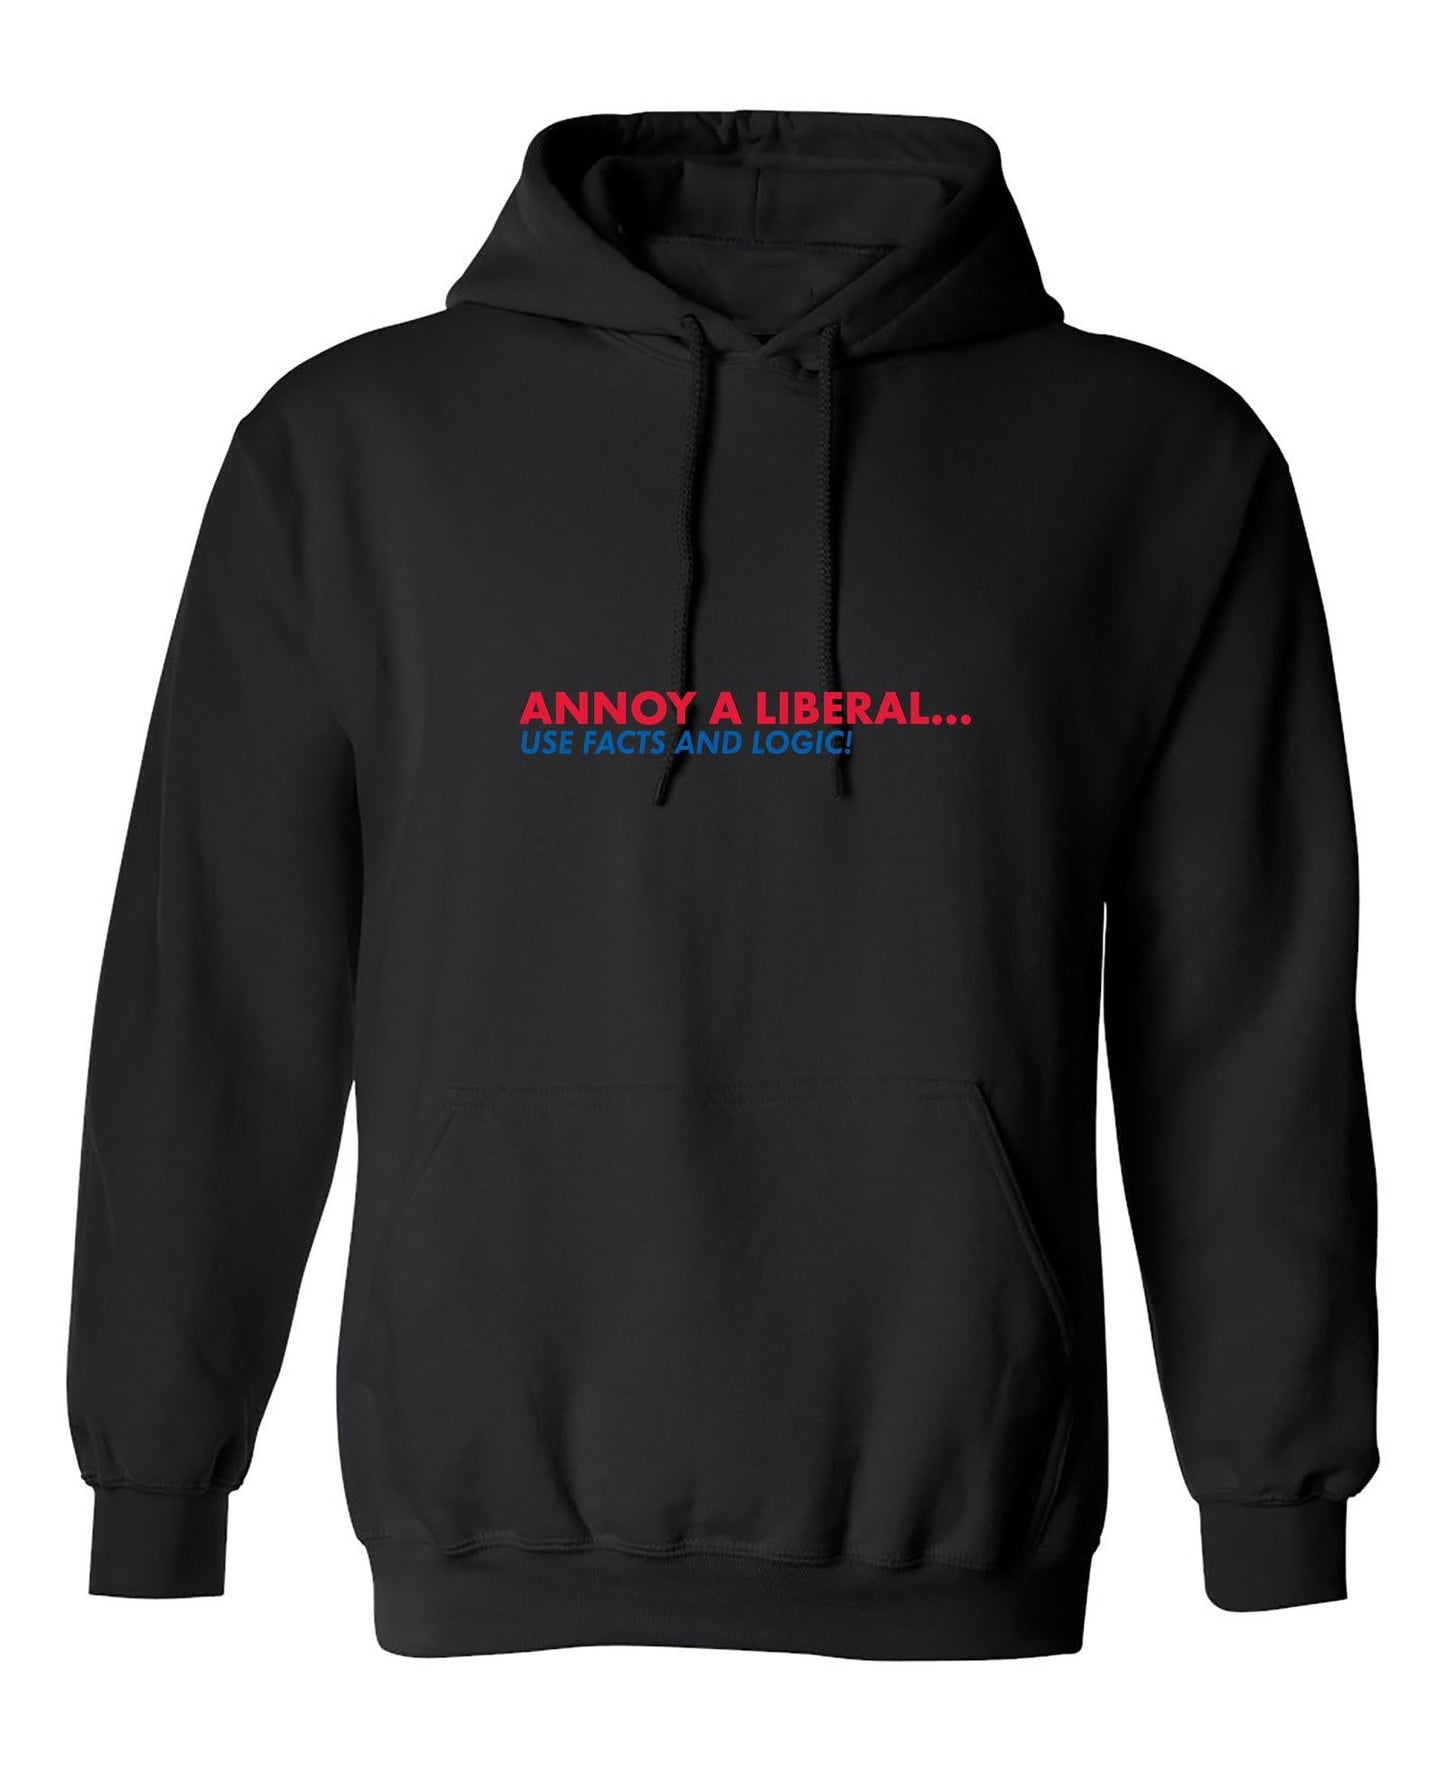 Funny T-Shirts design "Annoy A Liberal Use Facts And Logic"